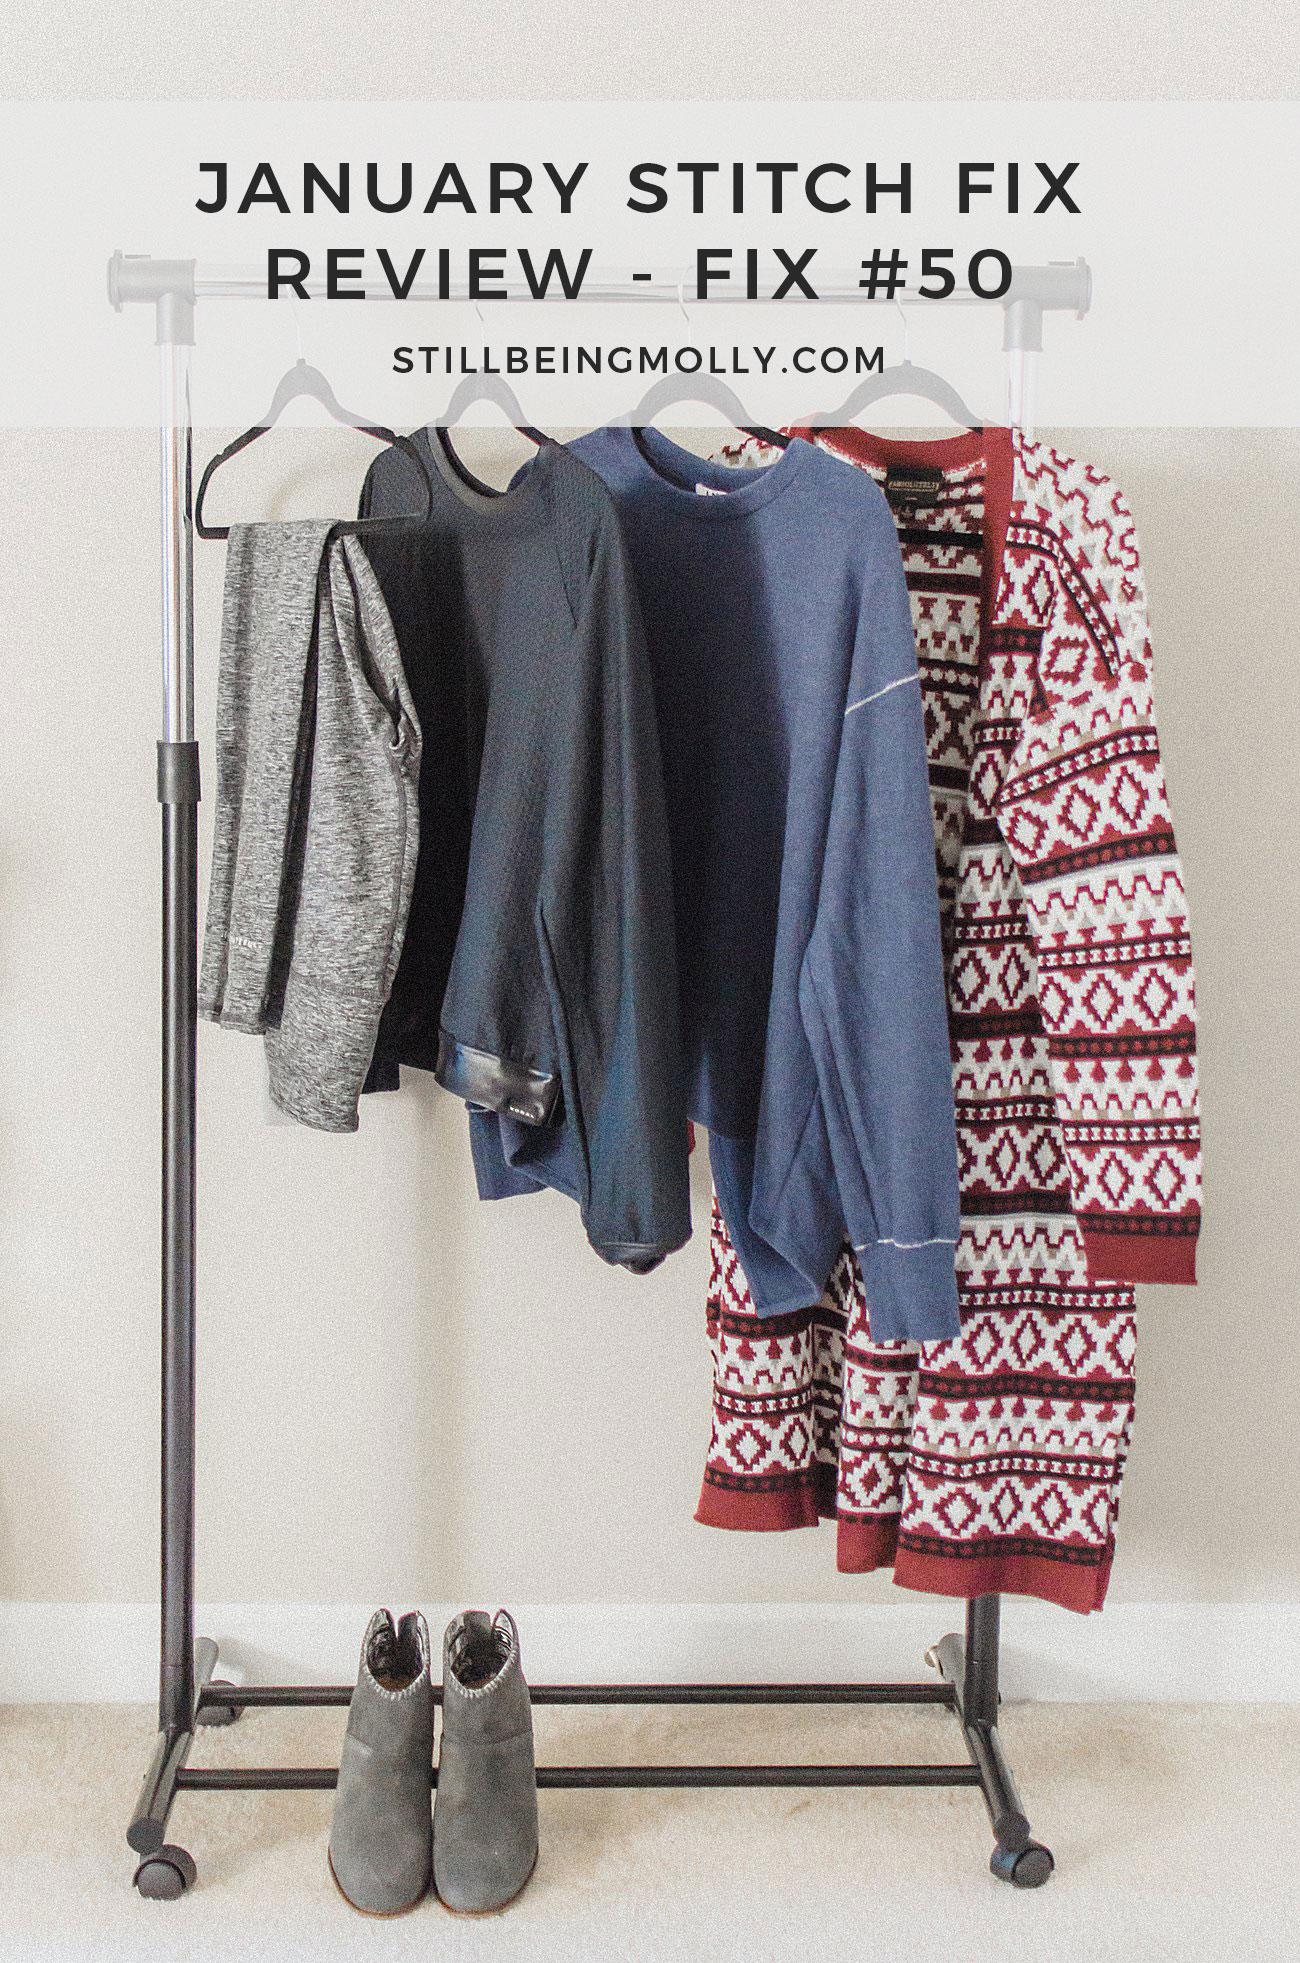 My 50th Fix & 5 Tips for Developing a Relationship with Your Stitch Fix Stylist by popular North Carolina ethical fashion blogger Still Being Molly